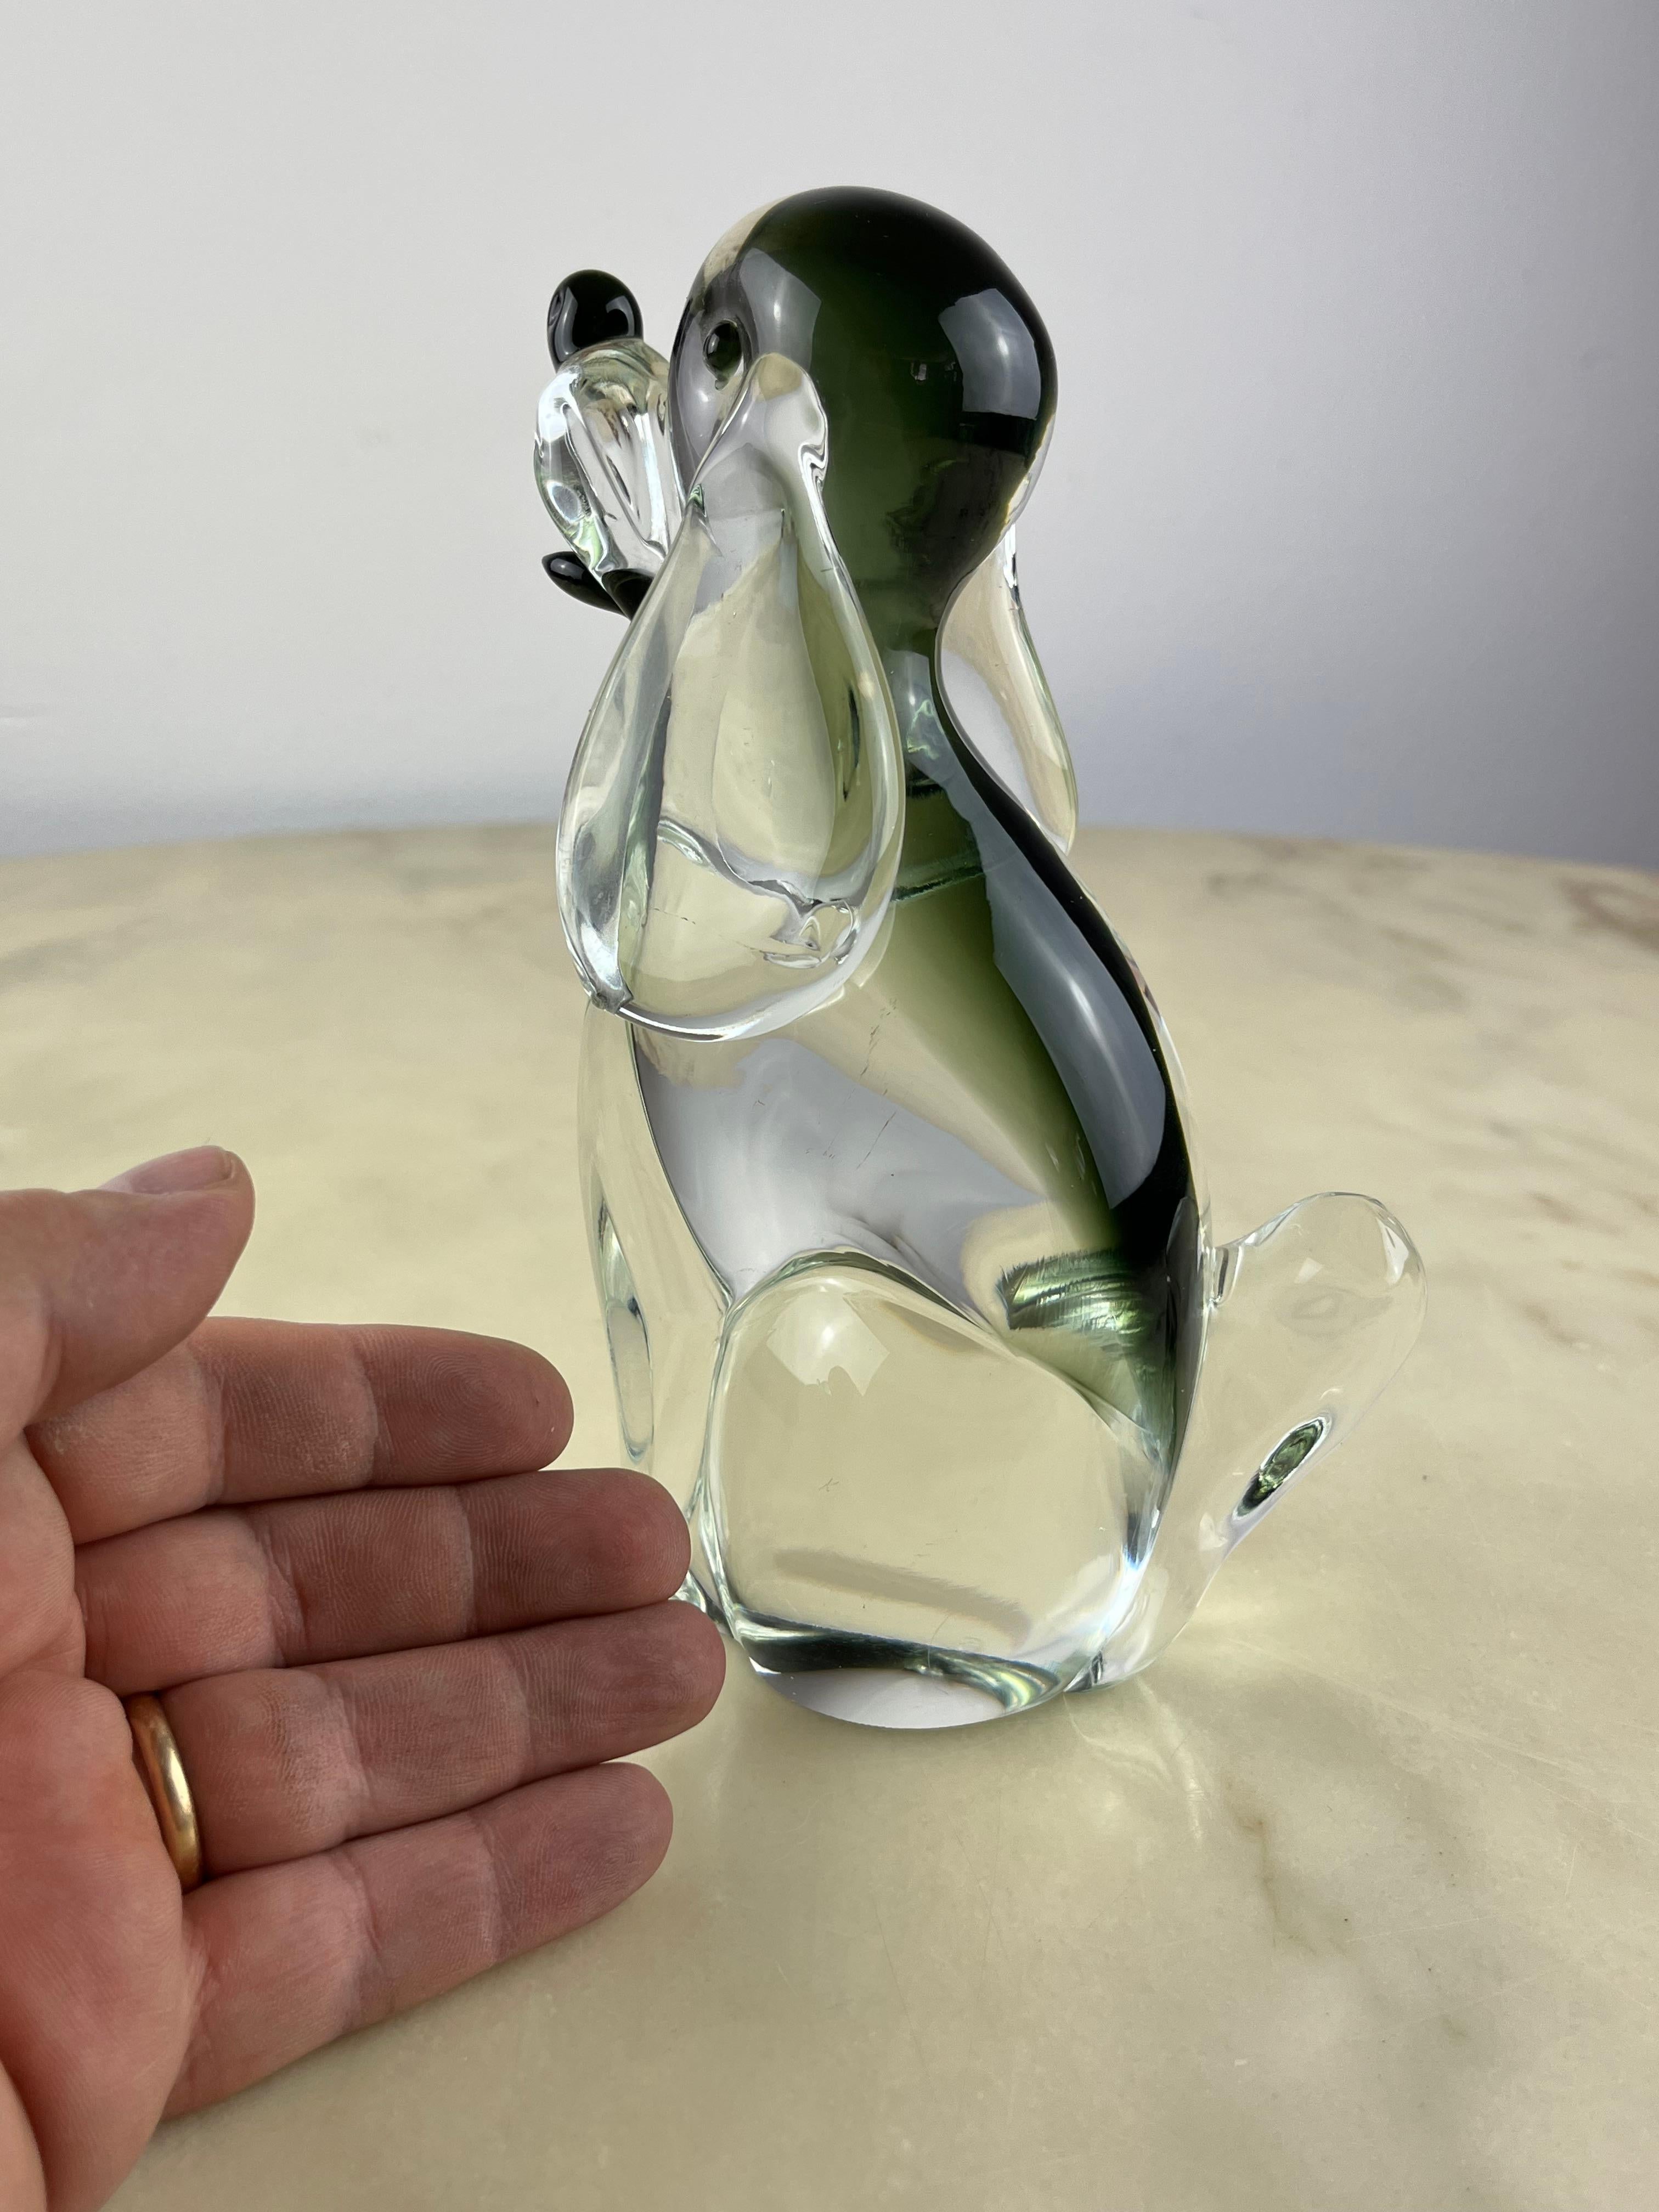 Murano glass dog, Italy, 1970s
Purchased by my grandparents during a pleasure trip to Venice. Intact.